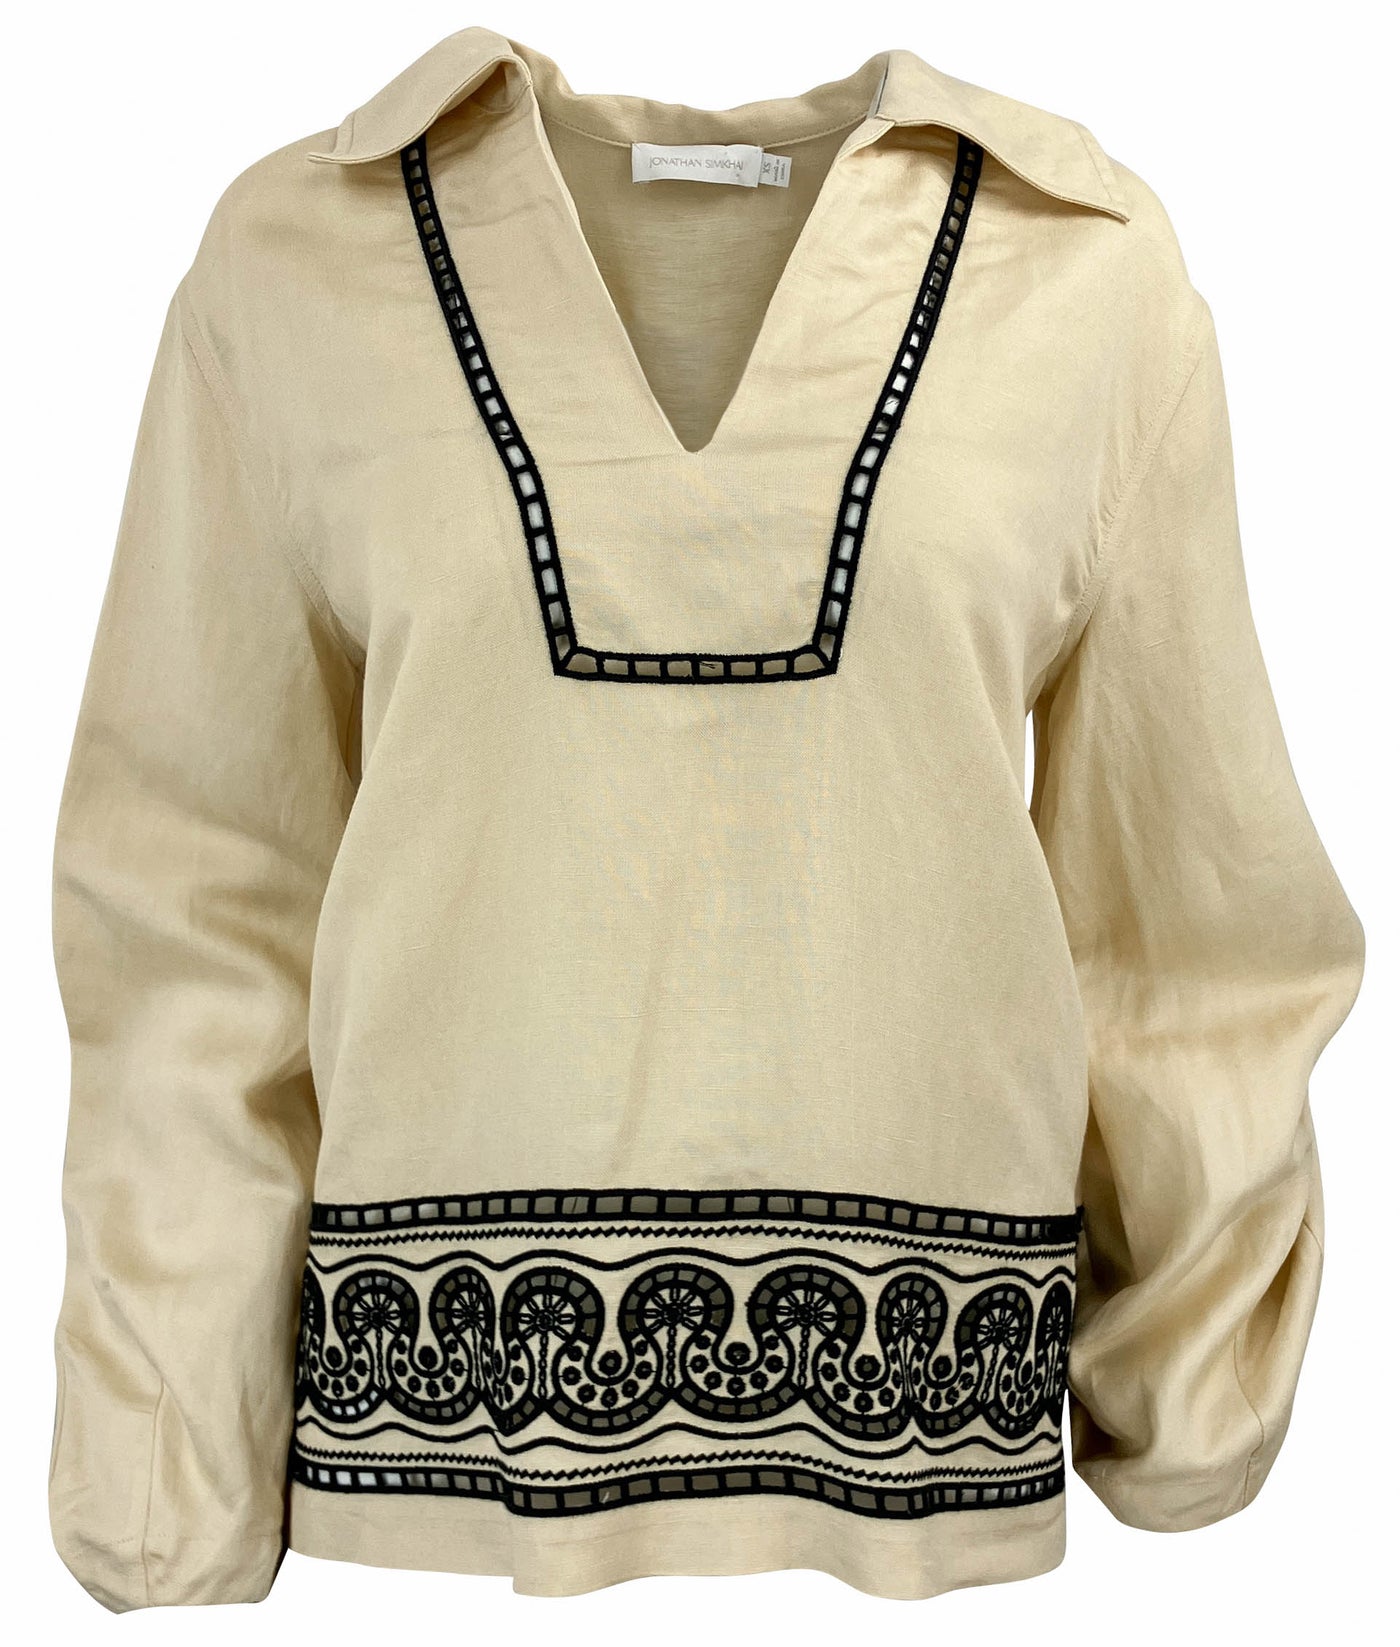 Jonathan Simkhai Abel Eyelet Embroidery Linen Blend Top in Beige and Black - Discounts on Jonathan Simkhai at UAL